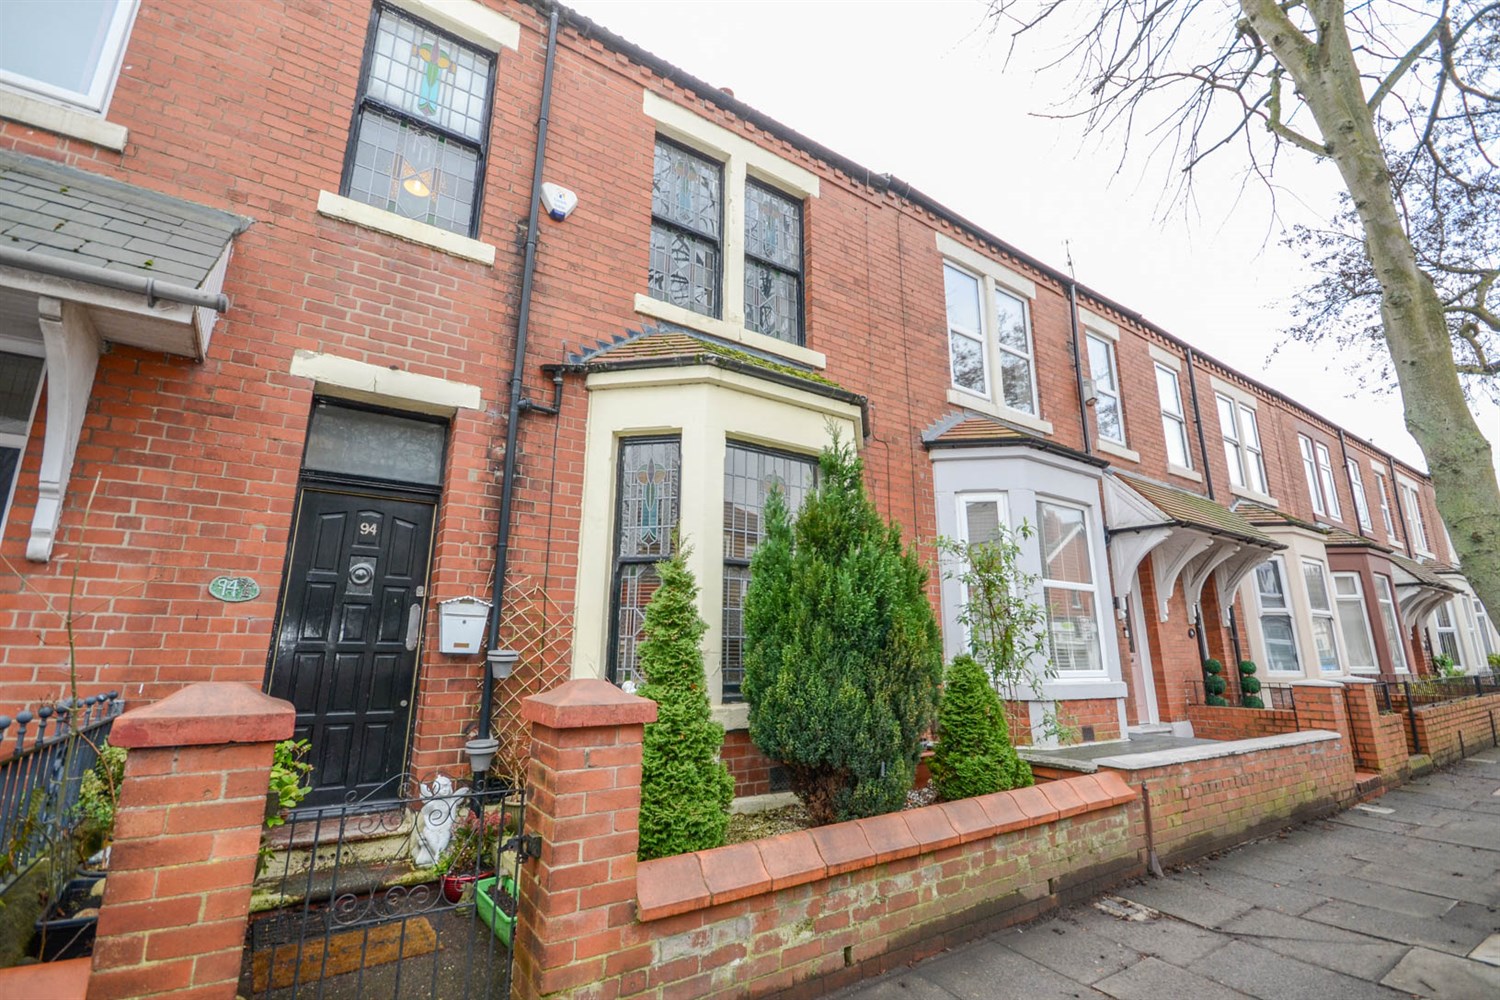 3 bed house for sale in Queen Alexandra Road, North Shields - Property Image 1